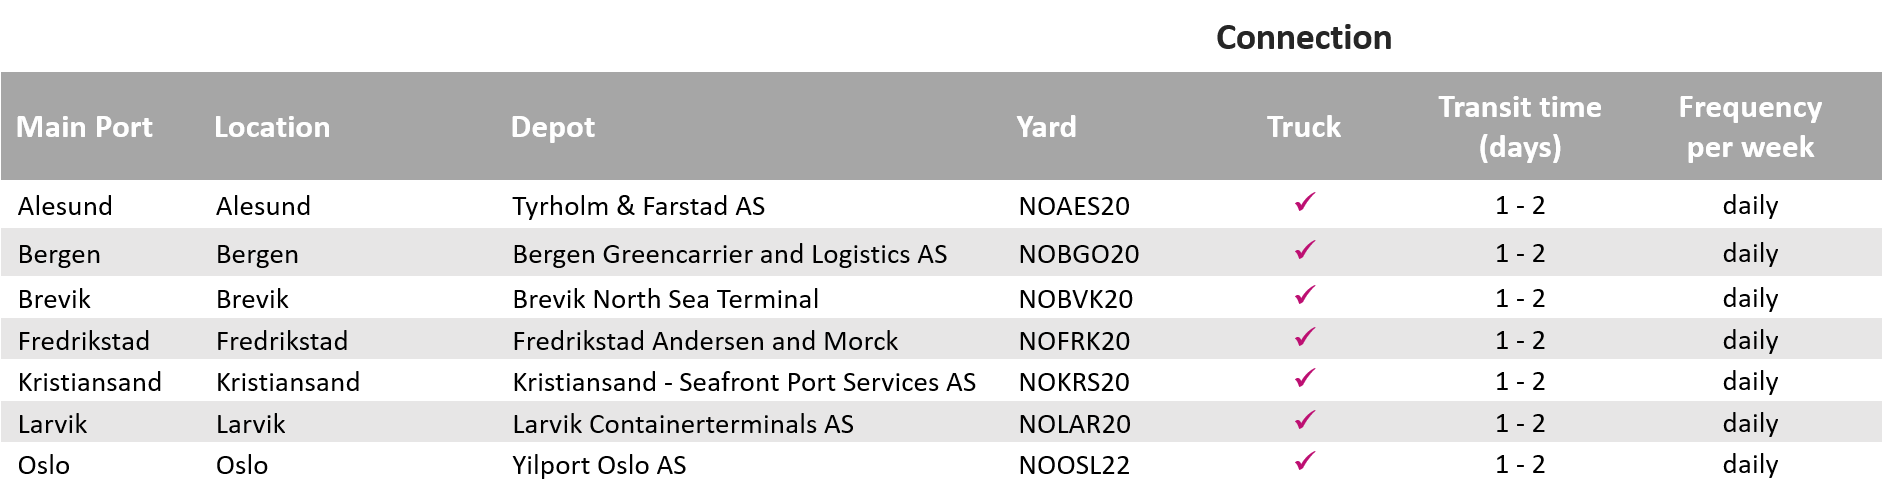 Carrier haulage depots and transit times_Norway